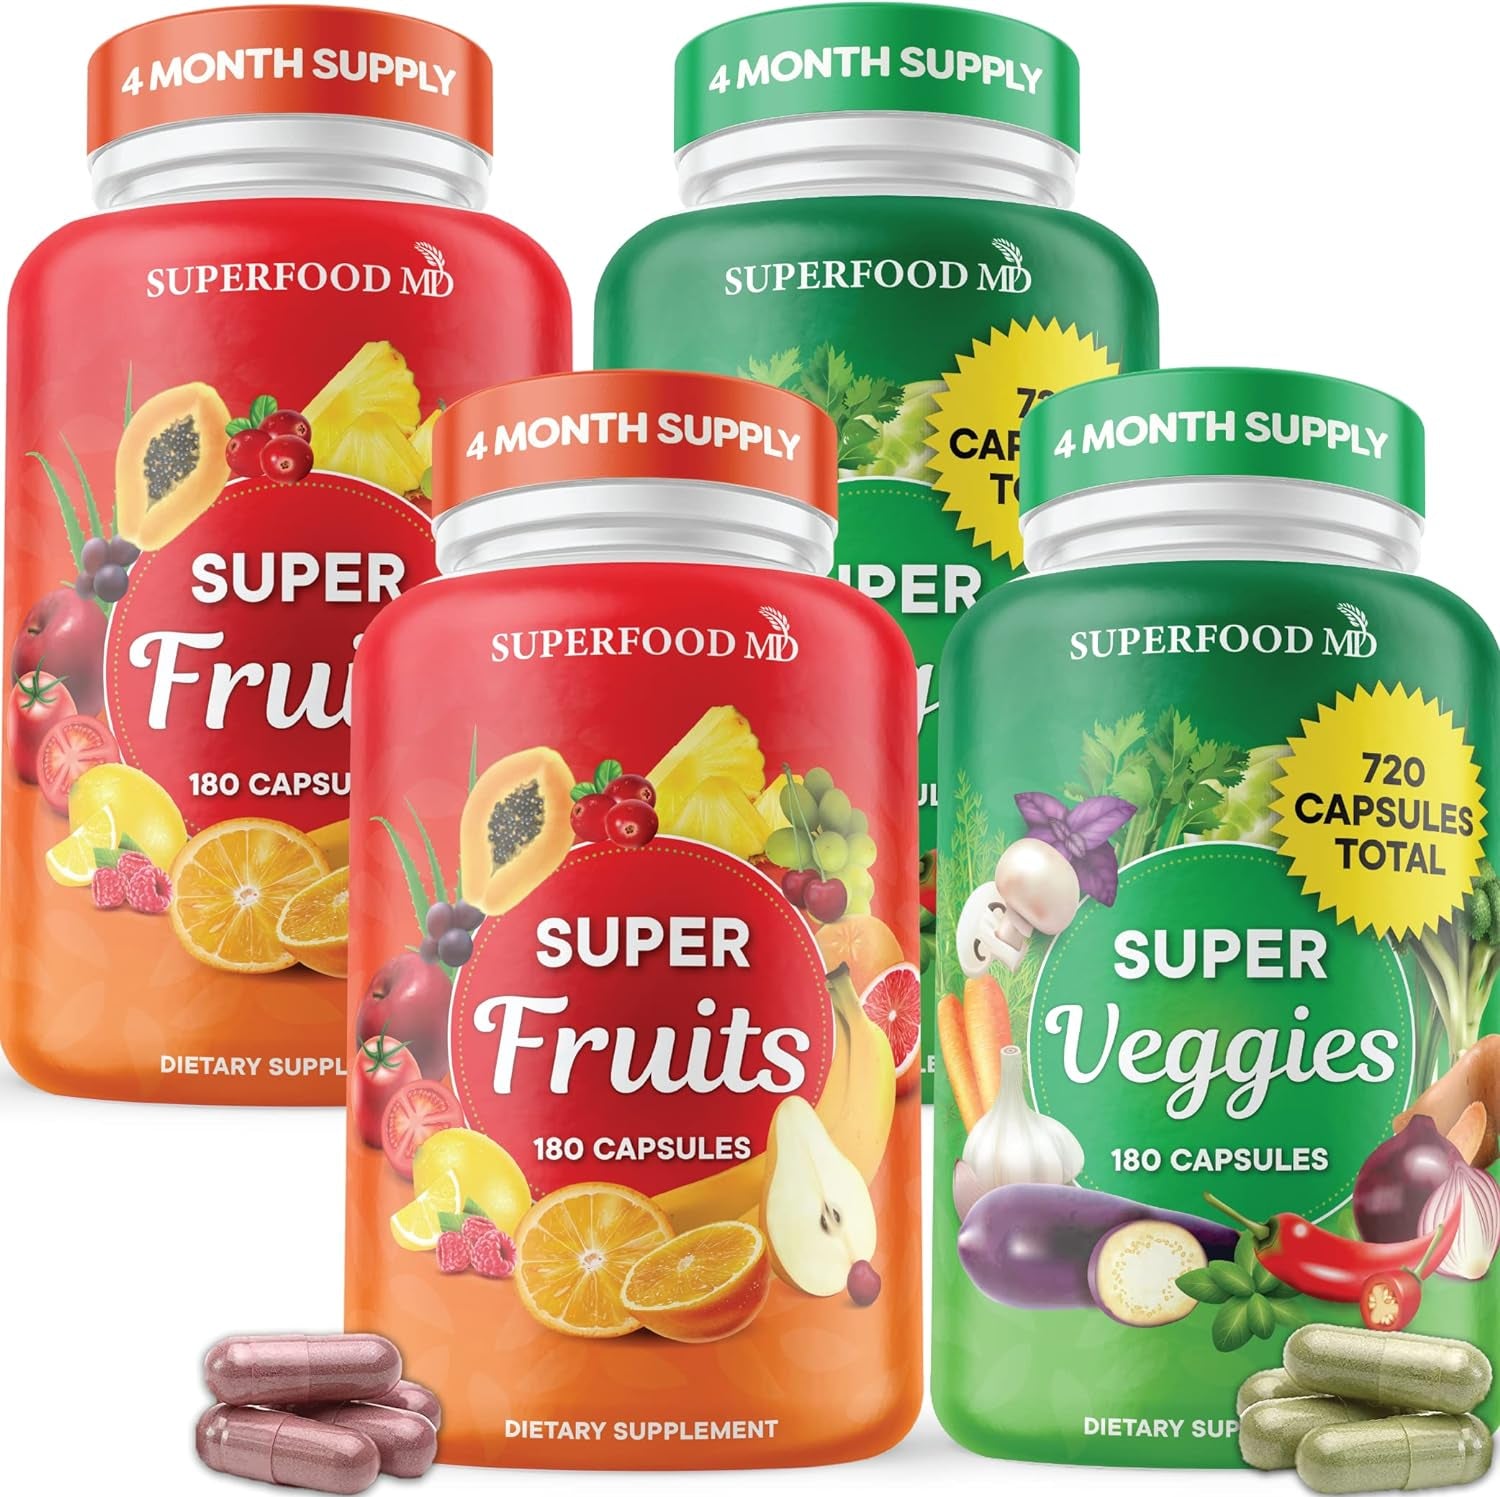 "Superfood Boost - 360 Whole Super Fruit and Vegetable Supplements for Natural Energy - 180 Count x 2"